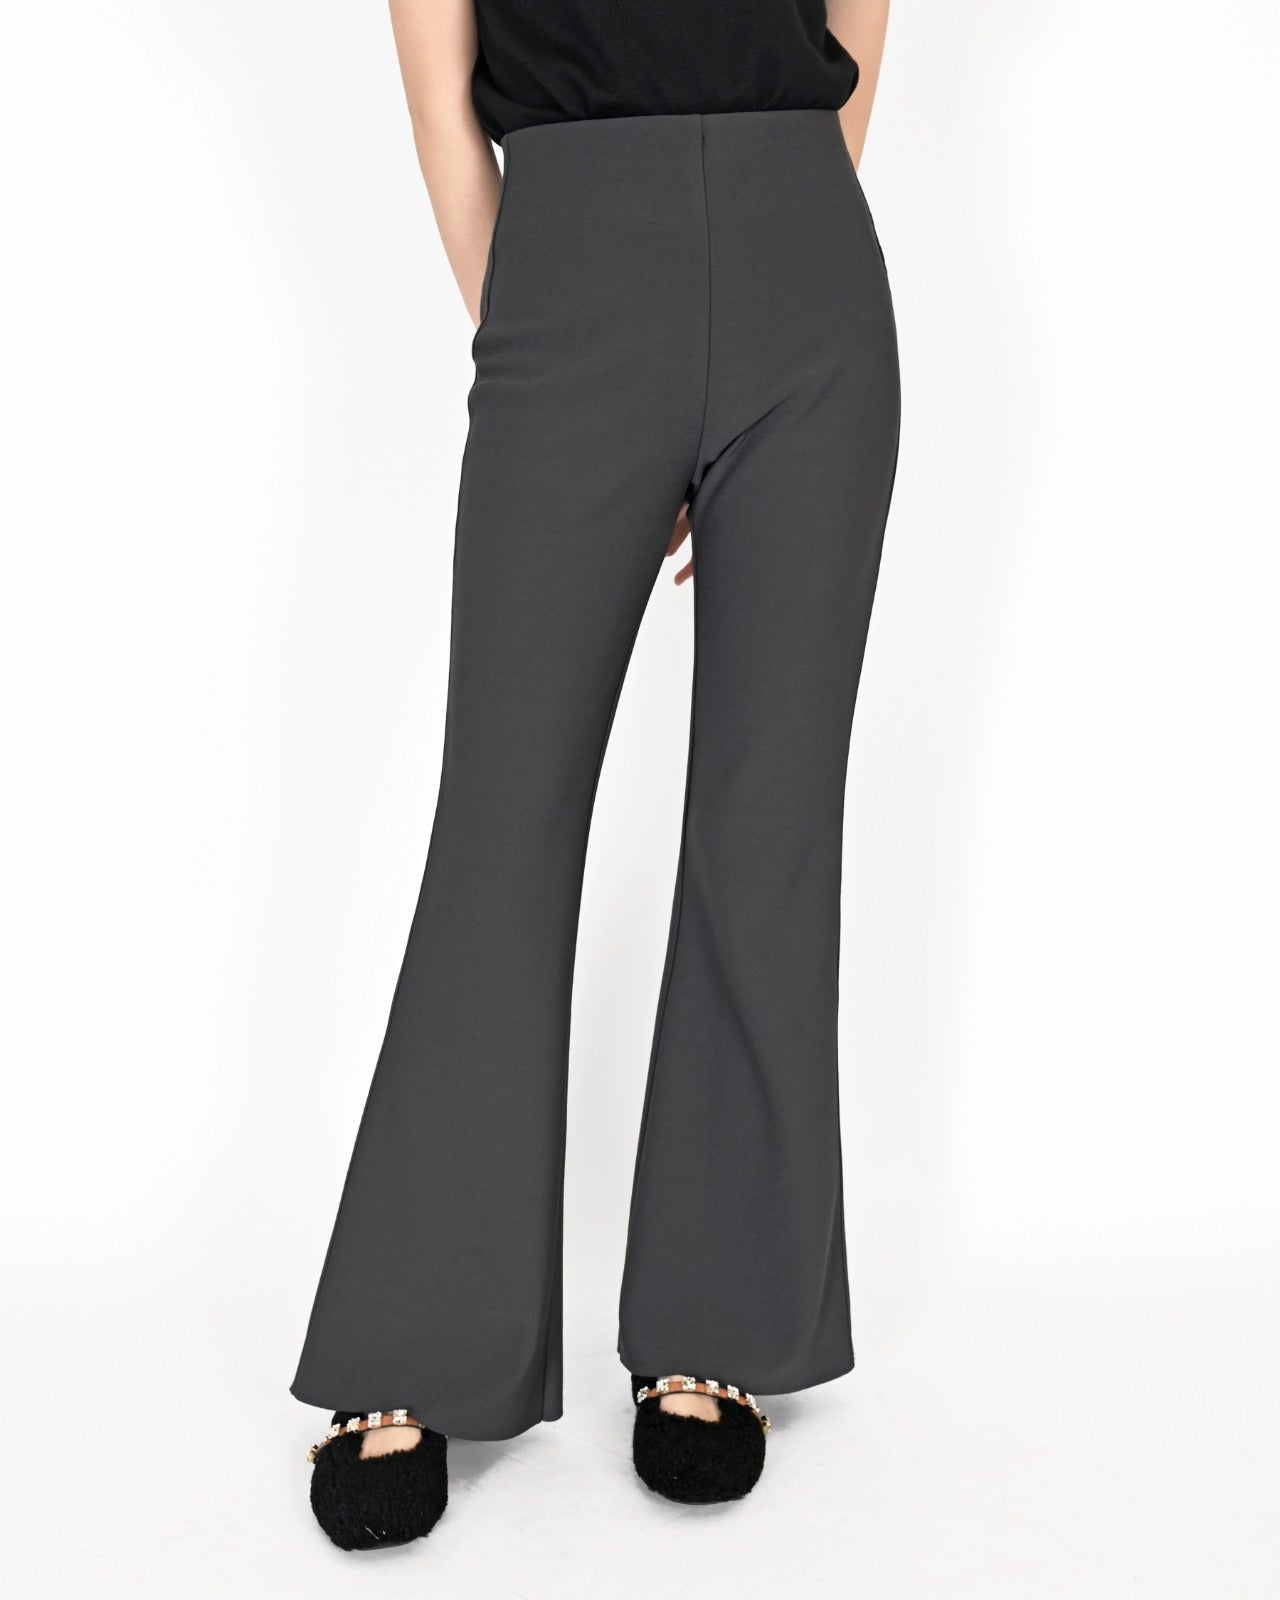 aalis LILI double knit flare pants (Charcoal)